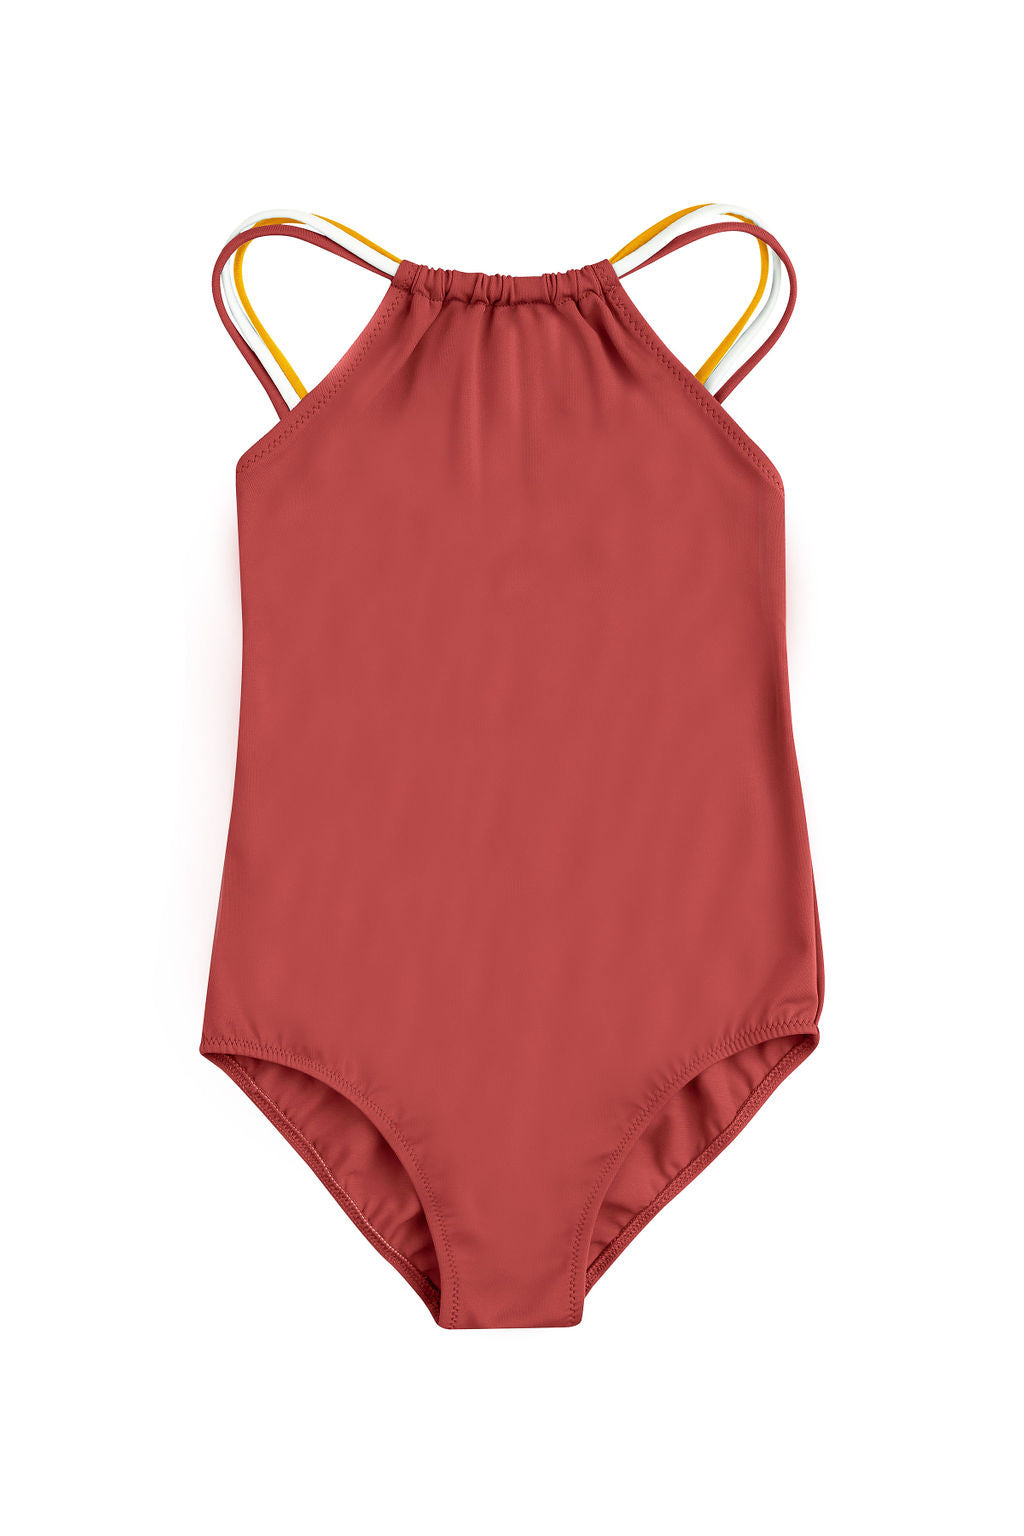 Load image into Gallery viewer, Girls One Piece Swimsuit in Terracotta | Folpetto
